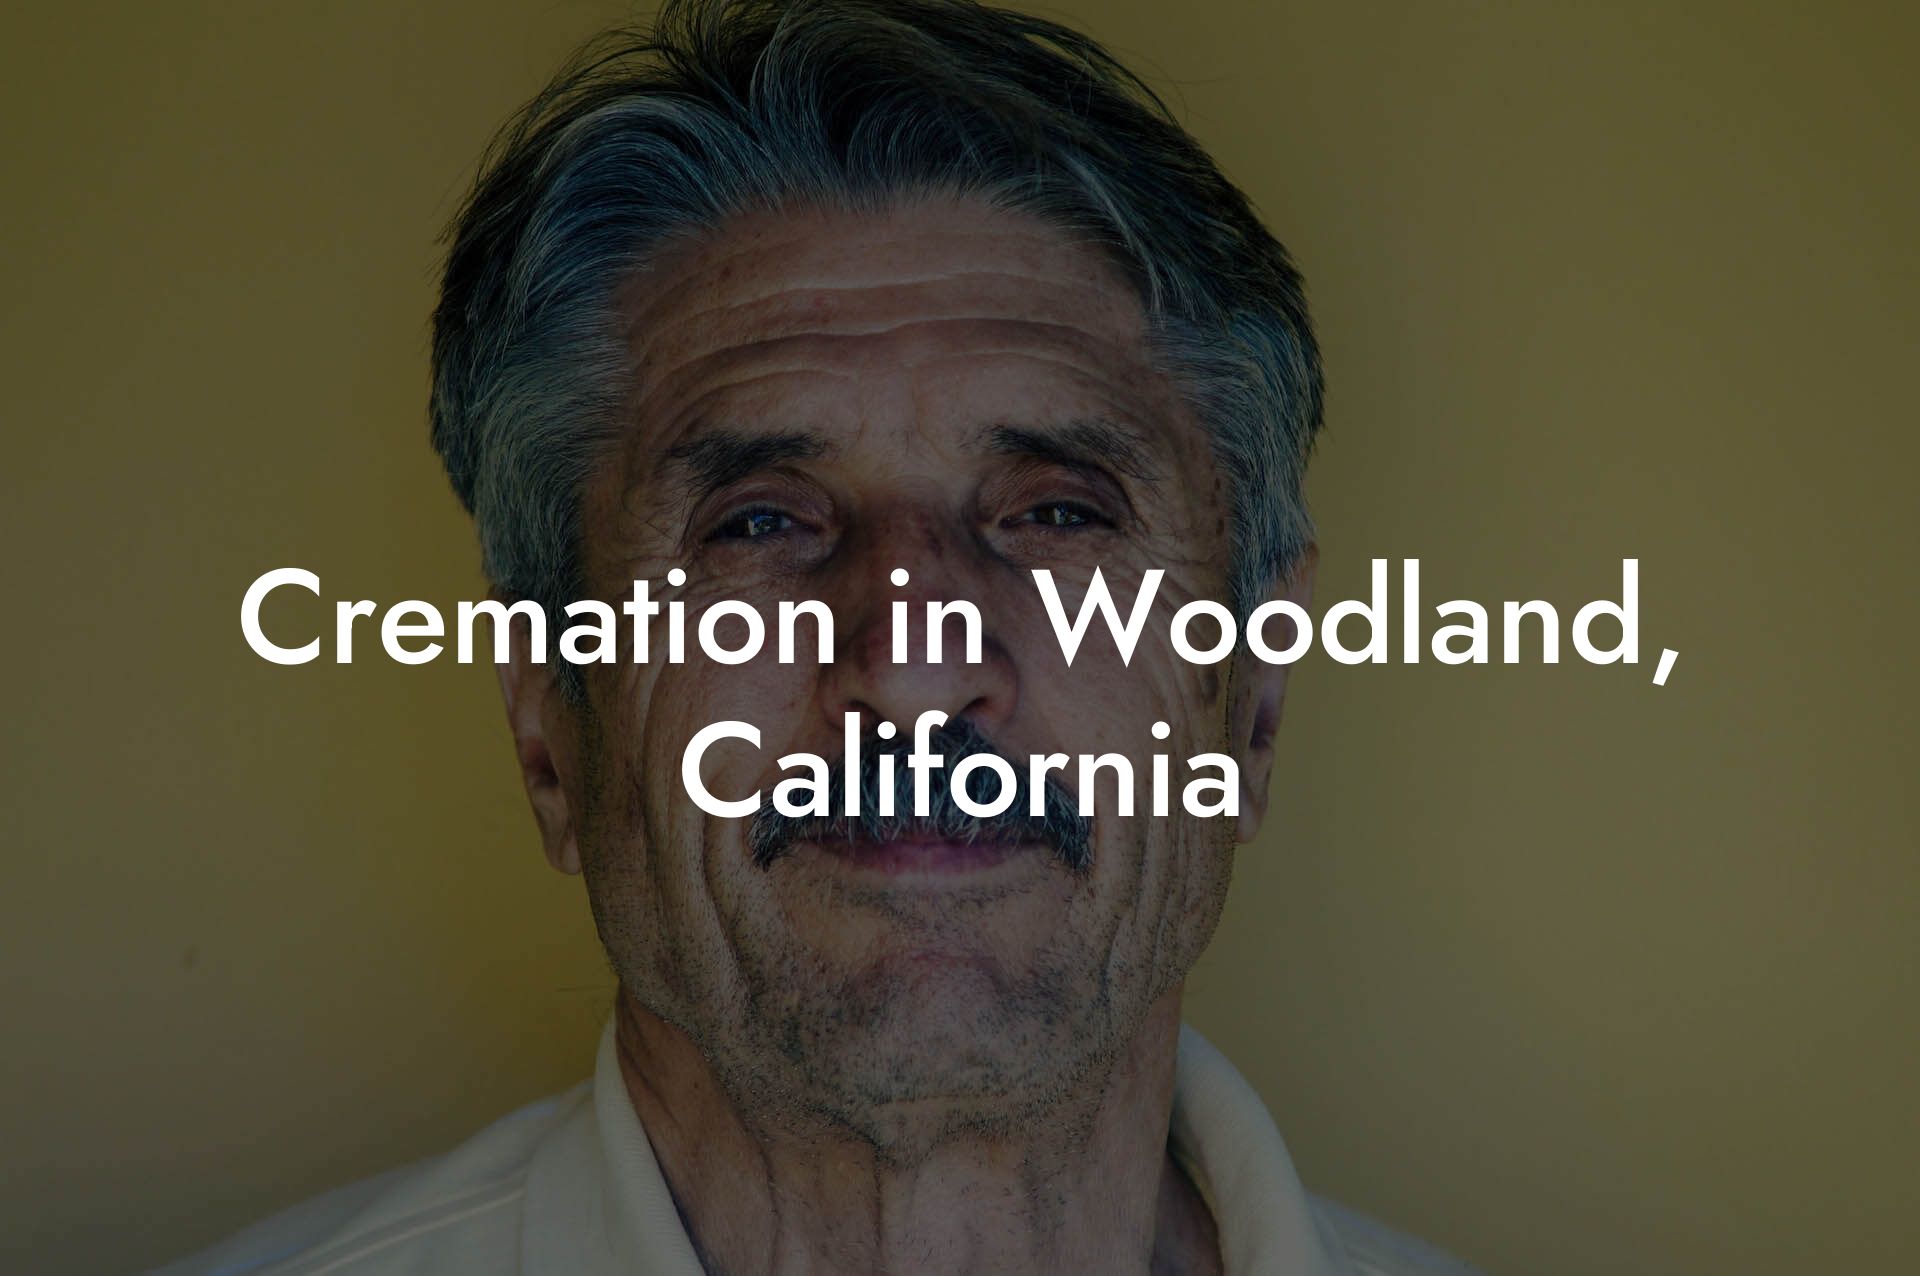 Cremation in Woodland, California